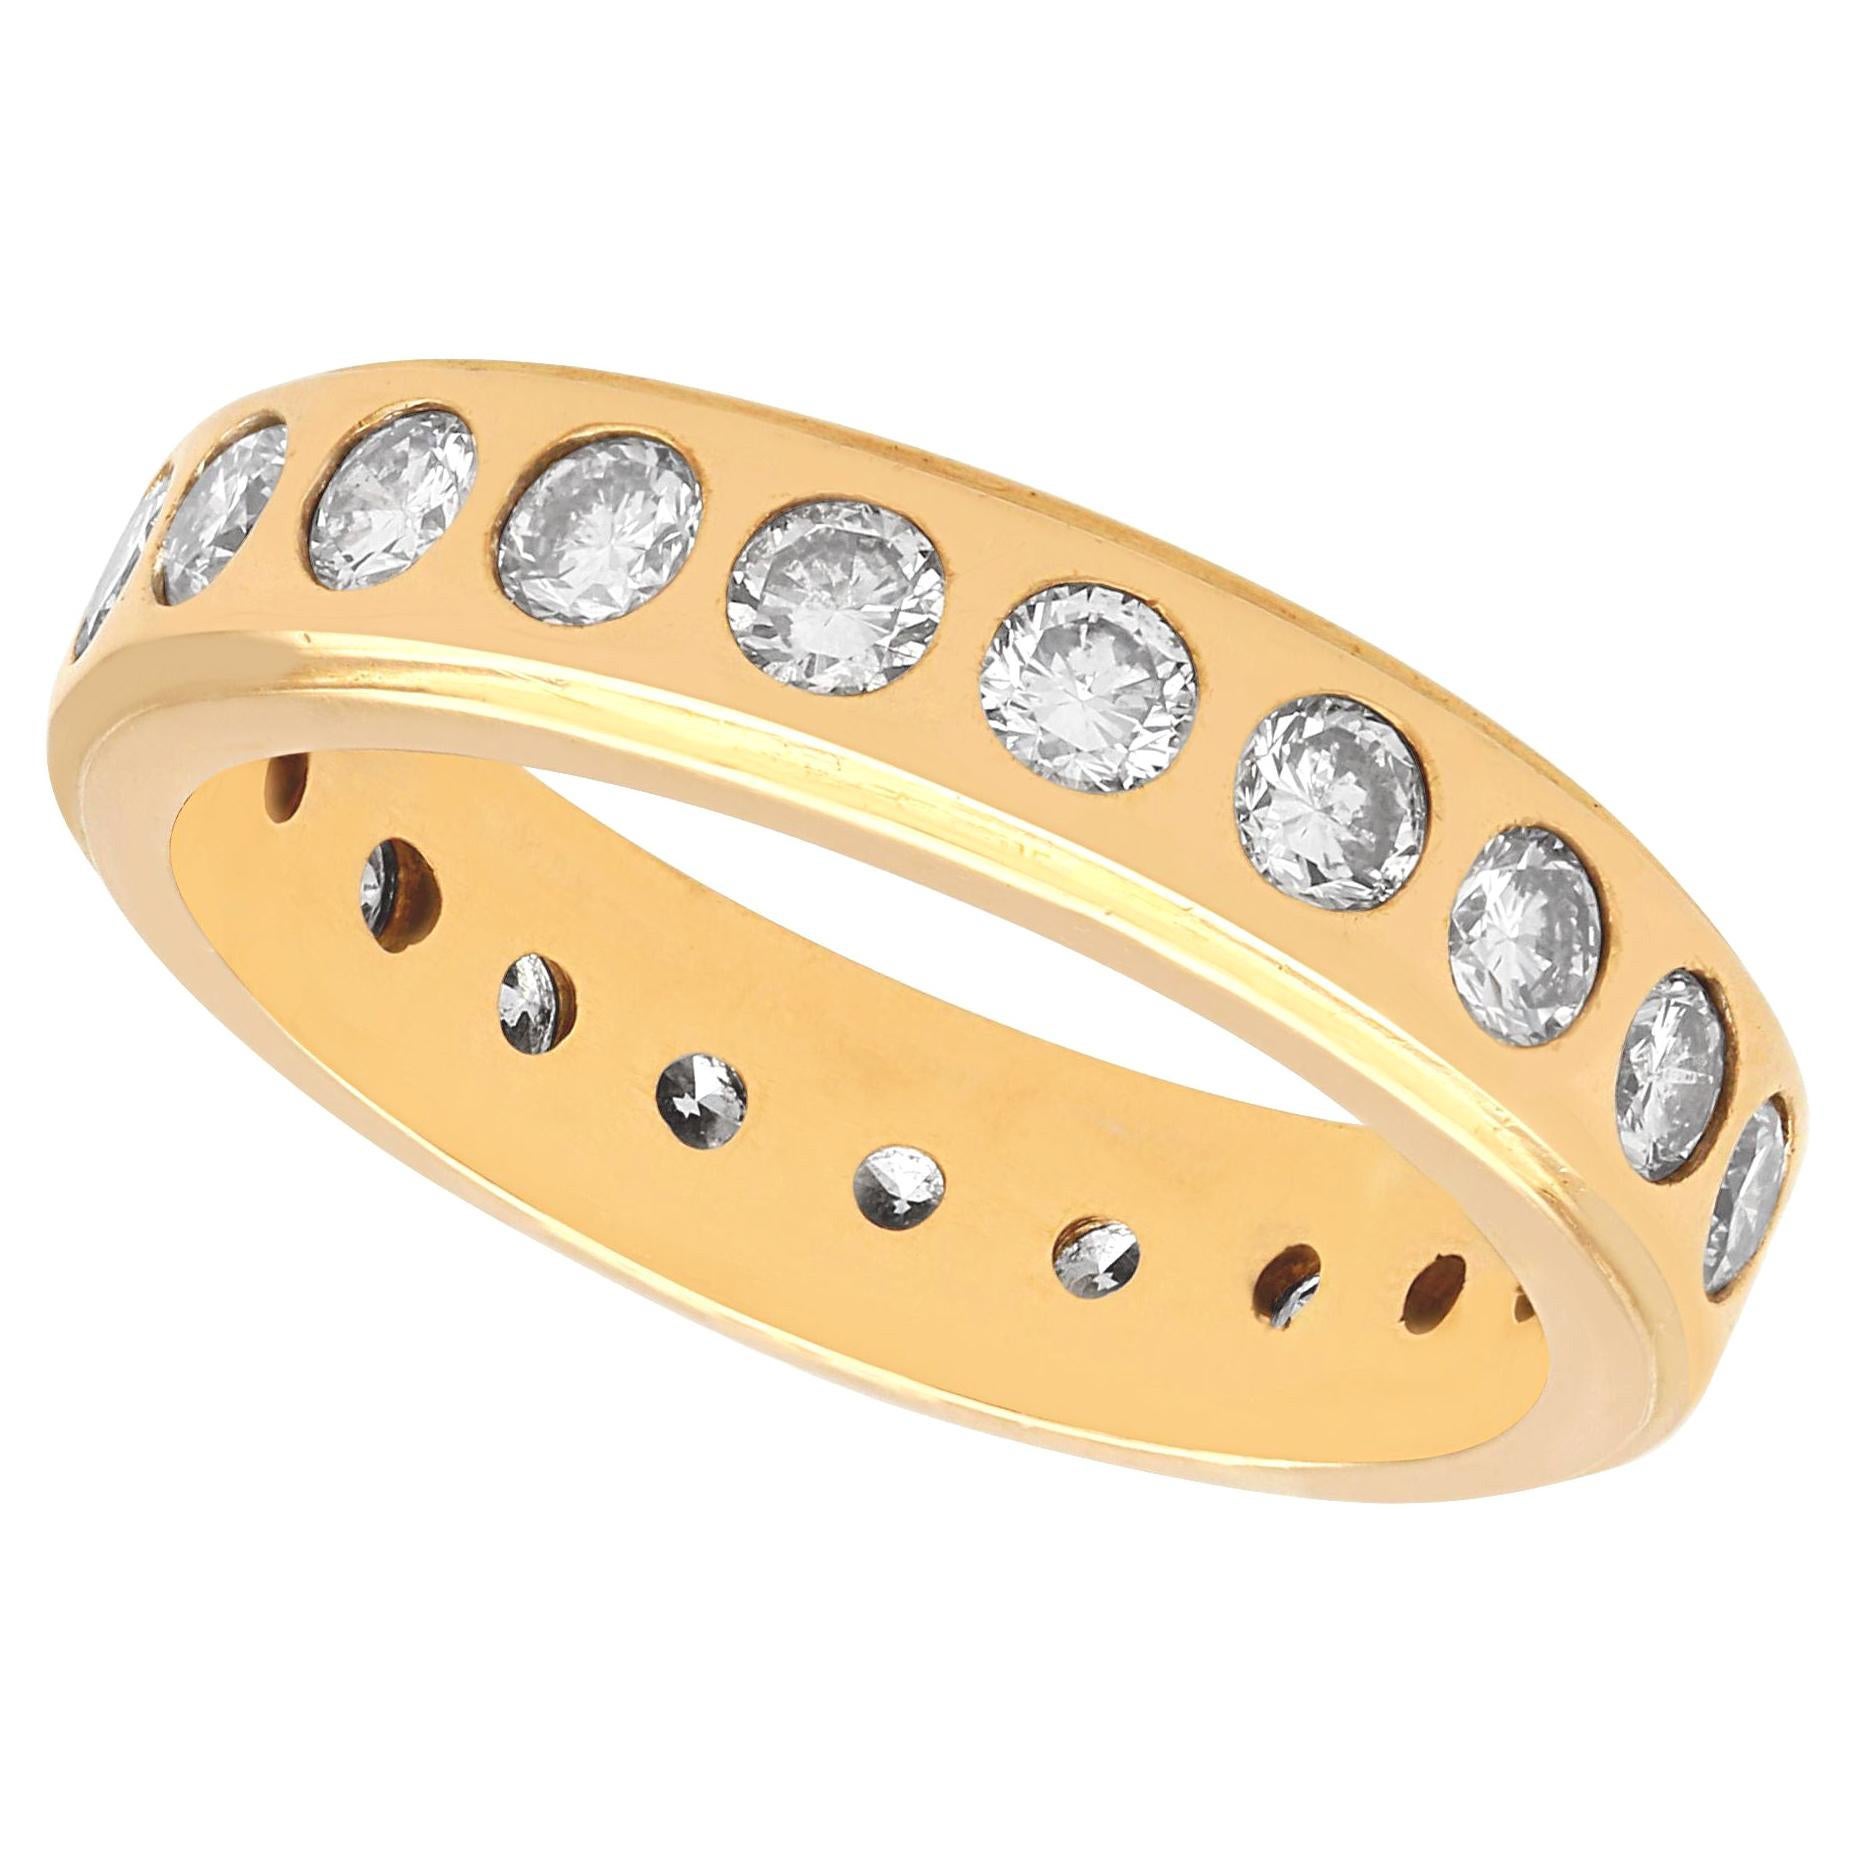 Vintage 1.76 carat Diamond and Yellow Gold Full Eternity Ring, circa 1960 For Sale